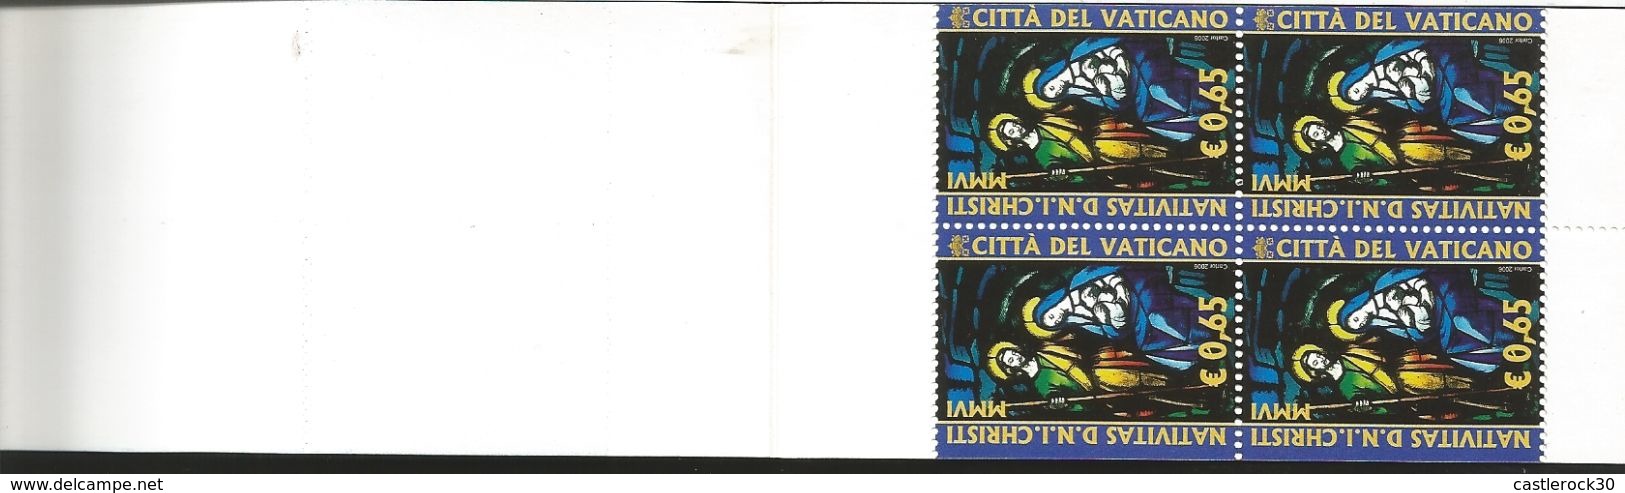 J) 2006 VATICAN CITY, BOOKLET, CHRISTMAS, STAR, MNH - Covers & Documents